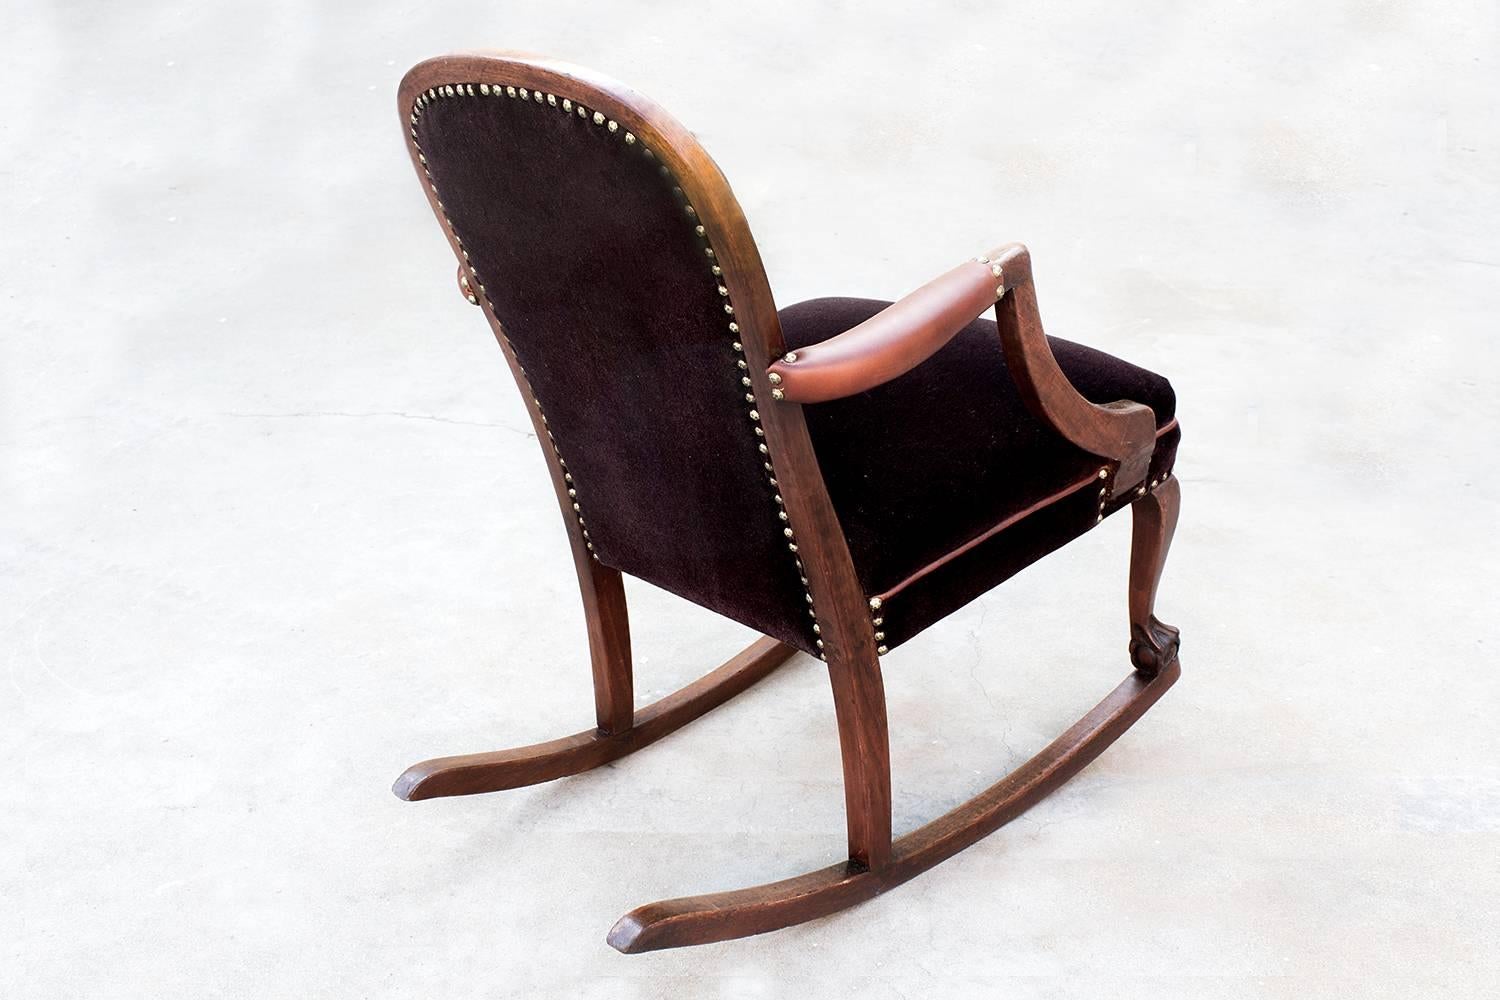 Beautifully refinished American Empire style rocking chair, reupholstered in a deep brown mohair with caramel brown leather arm covers and seat piping. Solid oak frame, reconditioned. This unusual antique rocker pairs soft curves with decorative